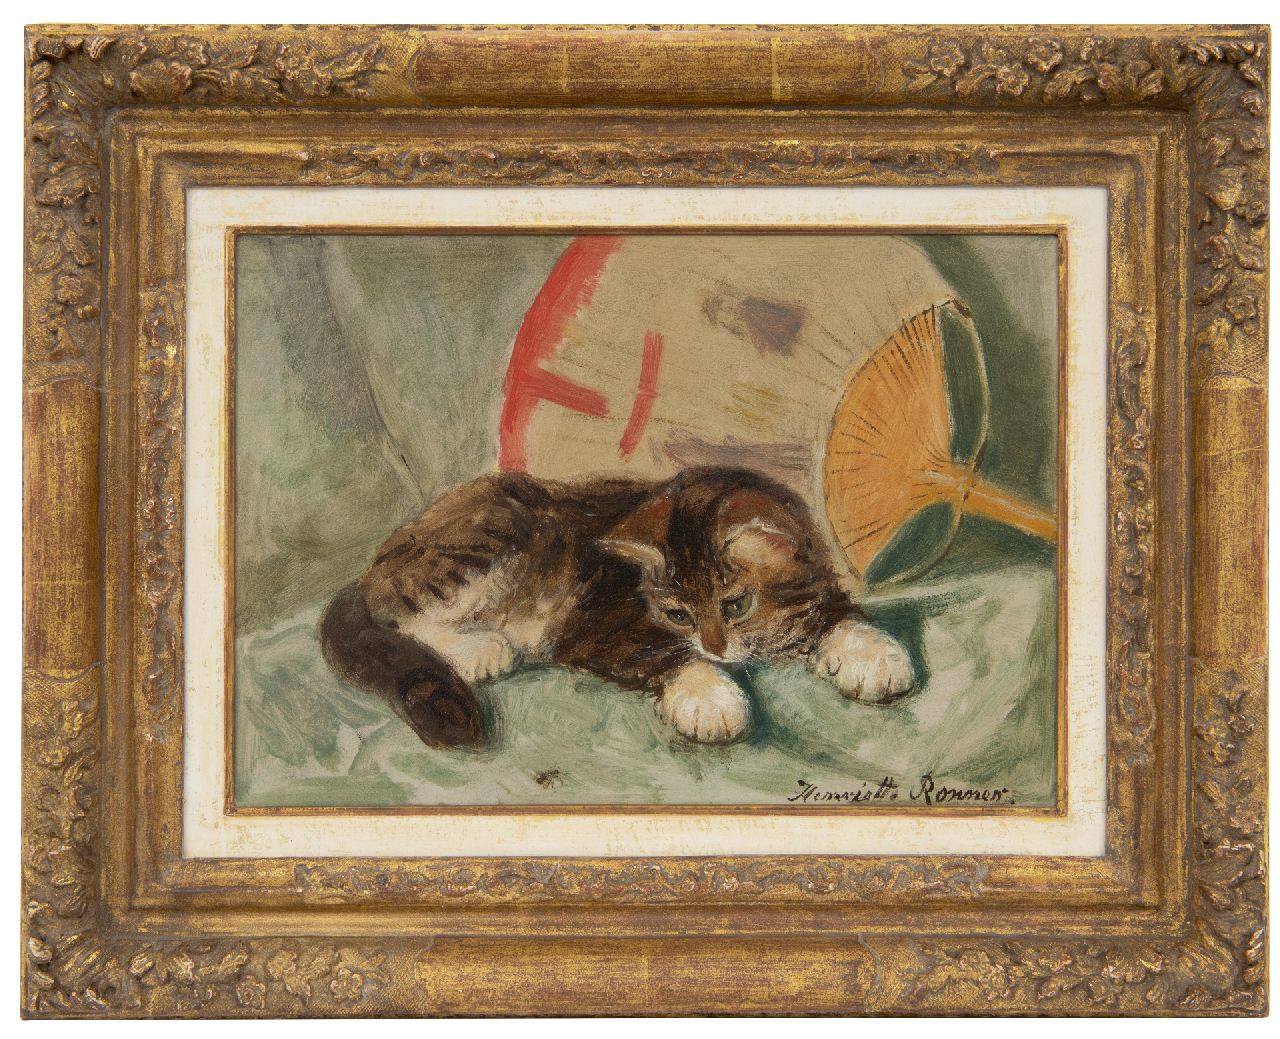 Ronner-Knip H.  | Henriette Ronner-Knip, A kitten observing a fly, oil on paper laid down on board 21.8 x 31.2 cm, signed l.r.